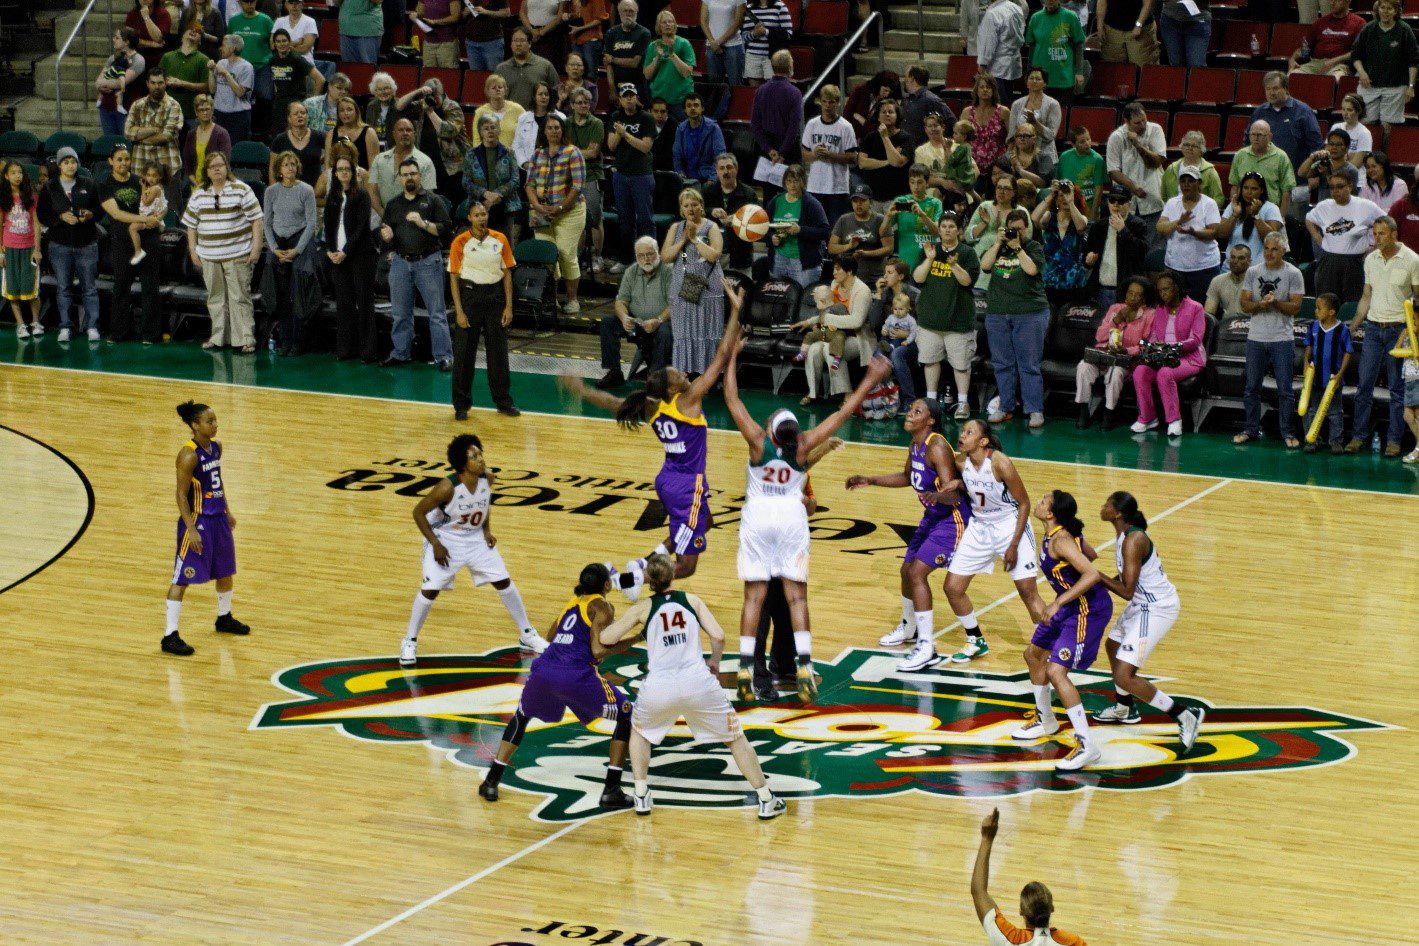 WNBA players tip off at the start of a basketball game. Many fans are in the background watching.